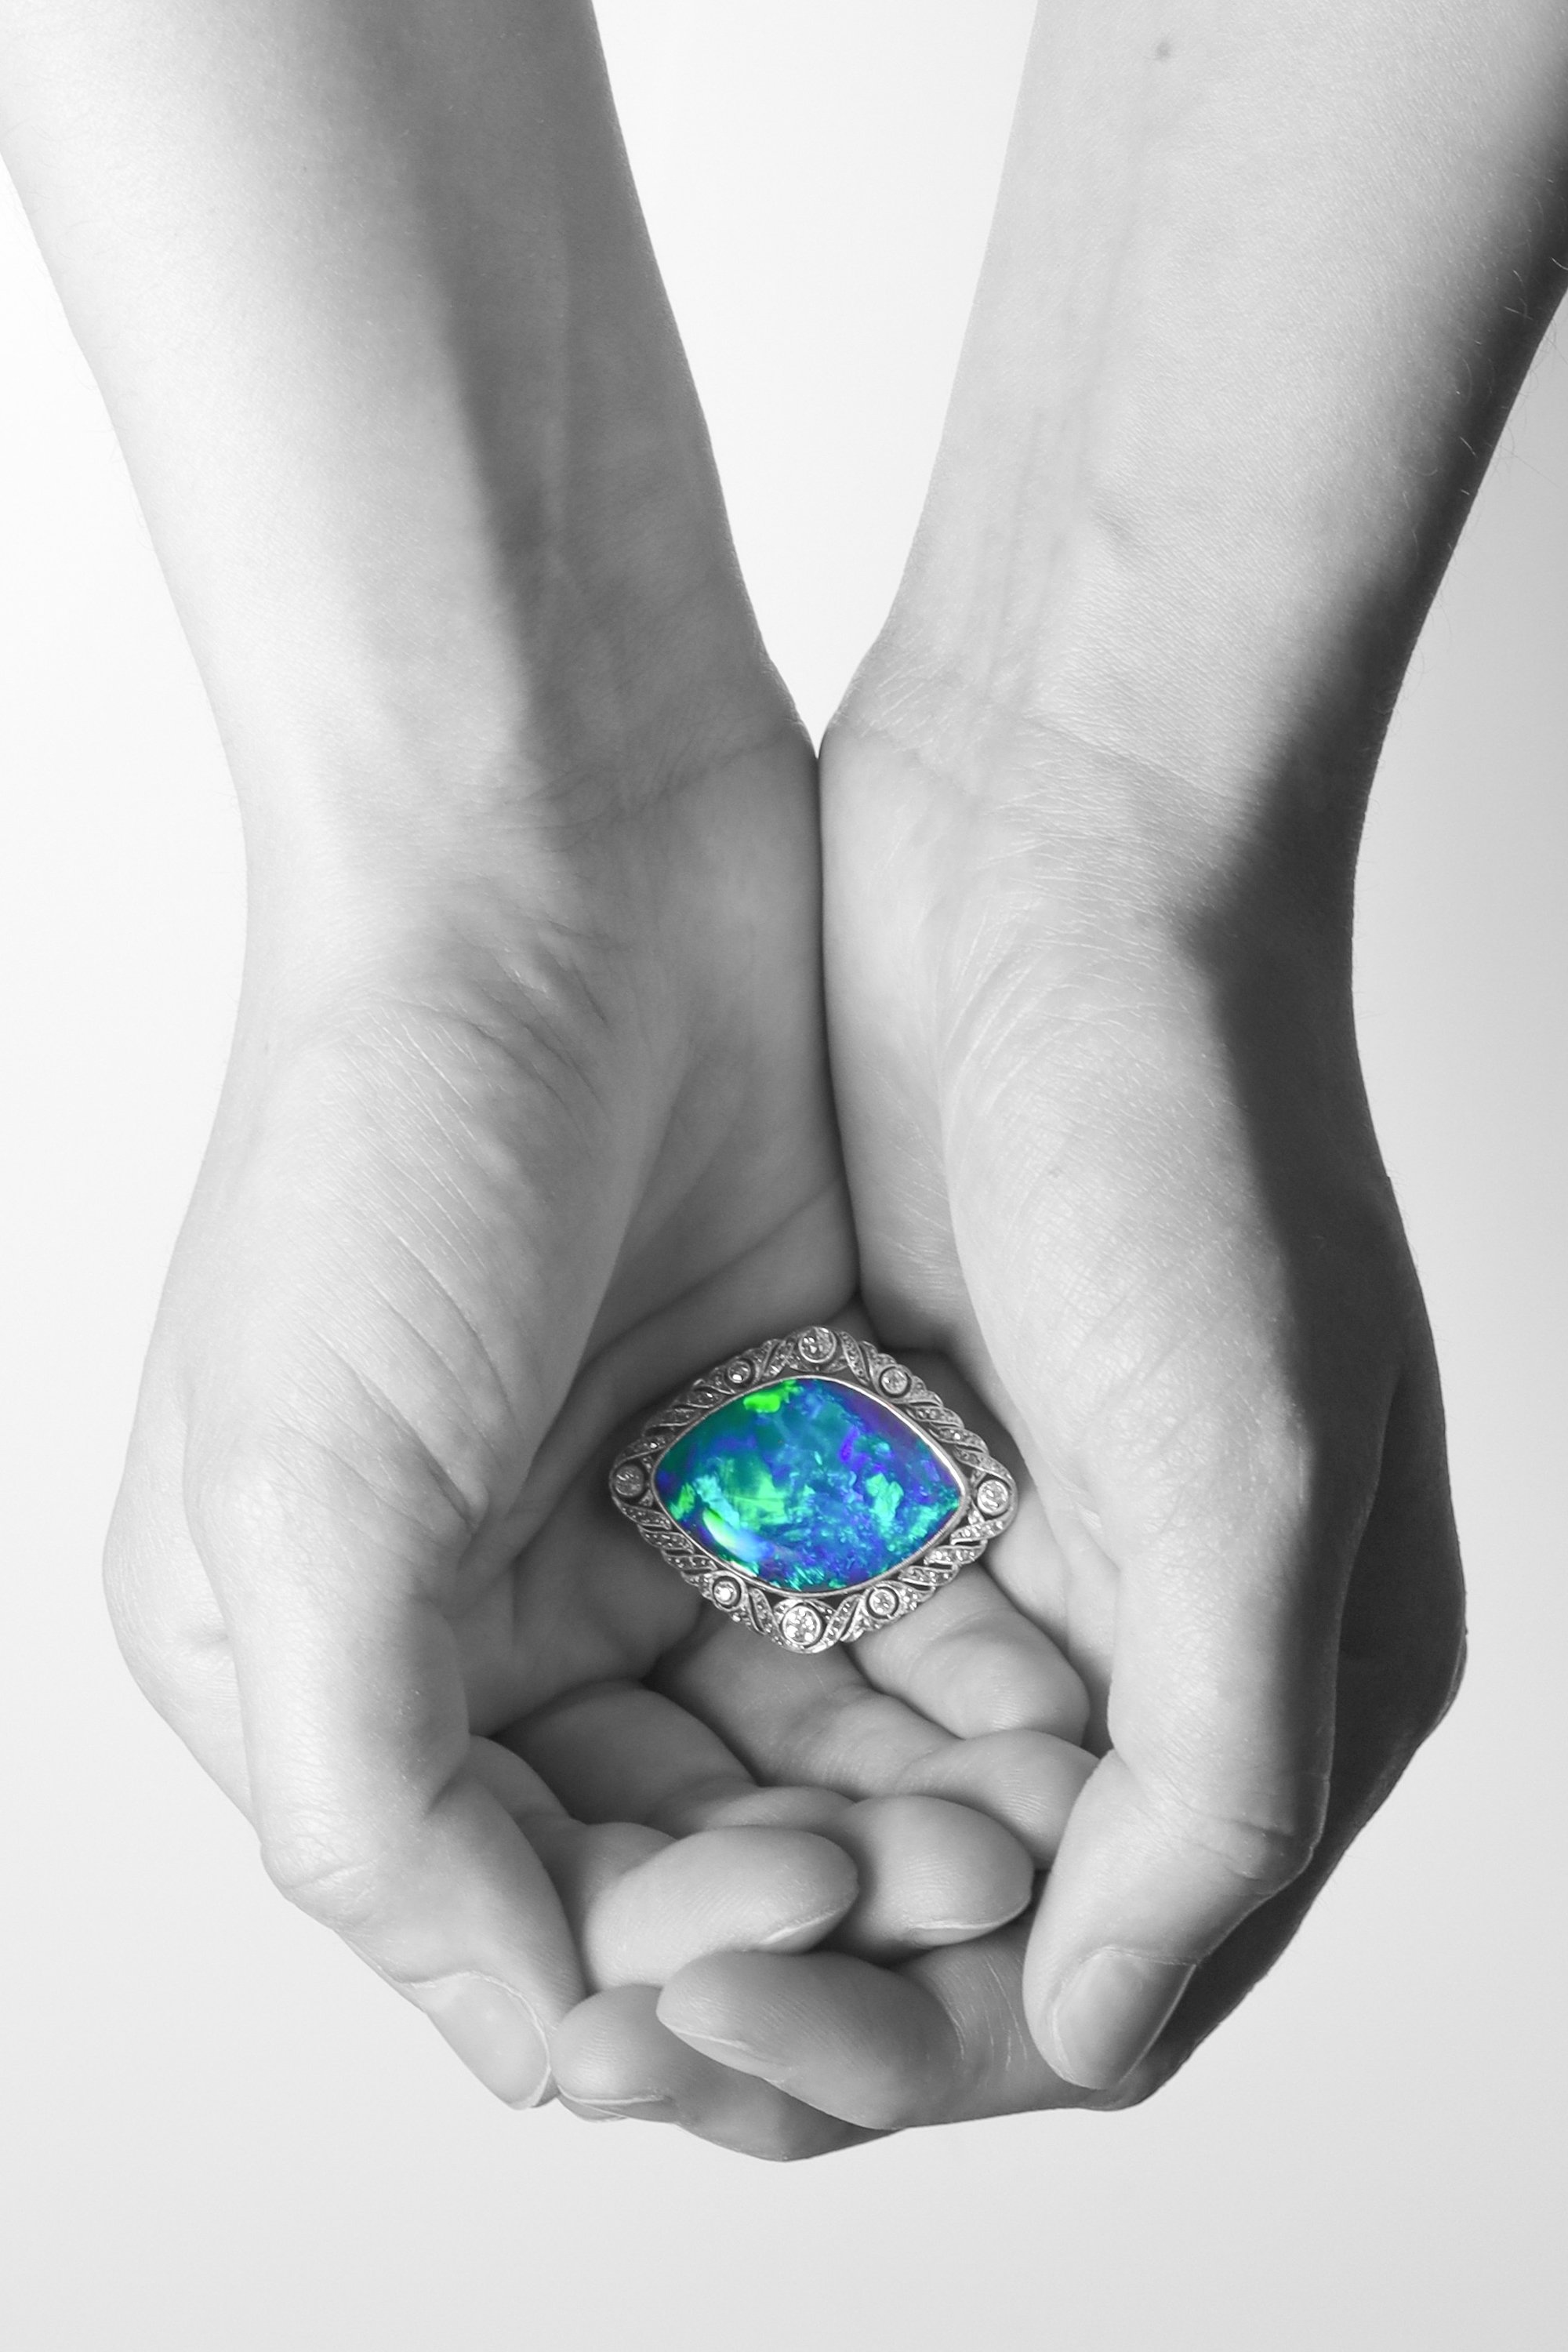 Click the picture to find out more about this Antique Cosmic Dance: 24ct Black Opal Brooch from 1920